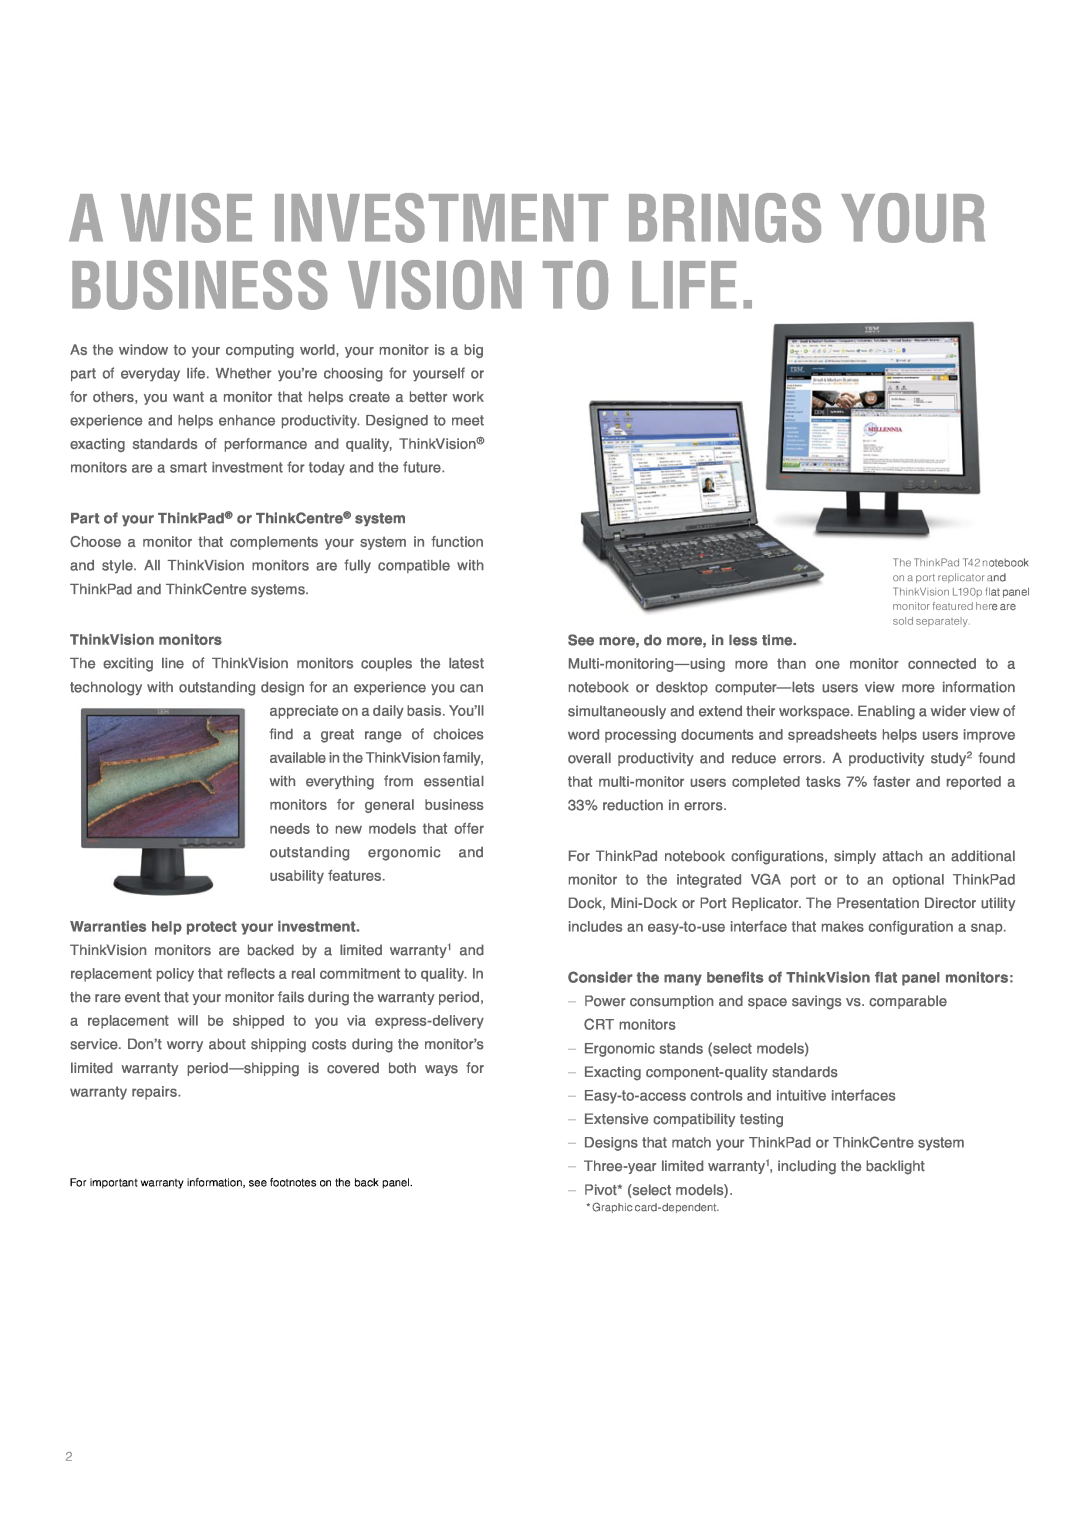 Lenovo manual Part of your ThinkPad or ThinkCentre system, ThinkVision monitors, Warranties help protect your investment 